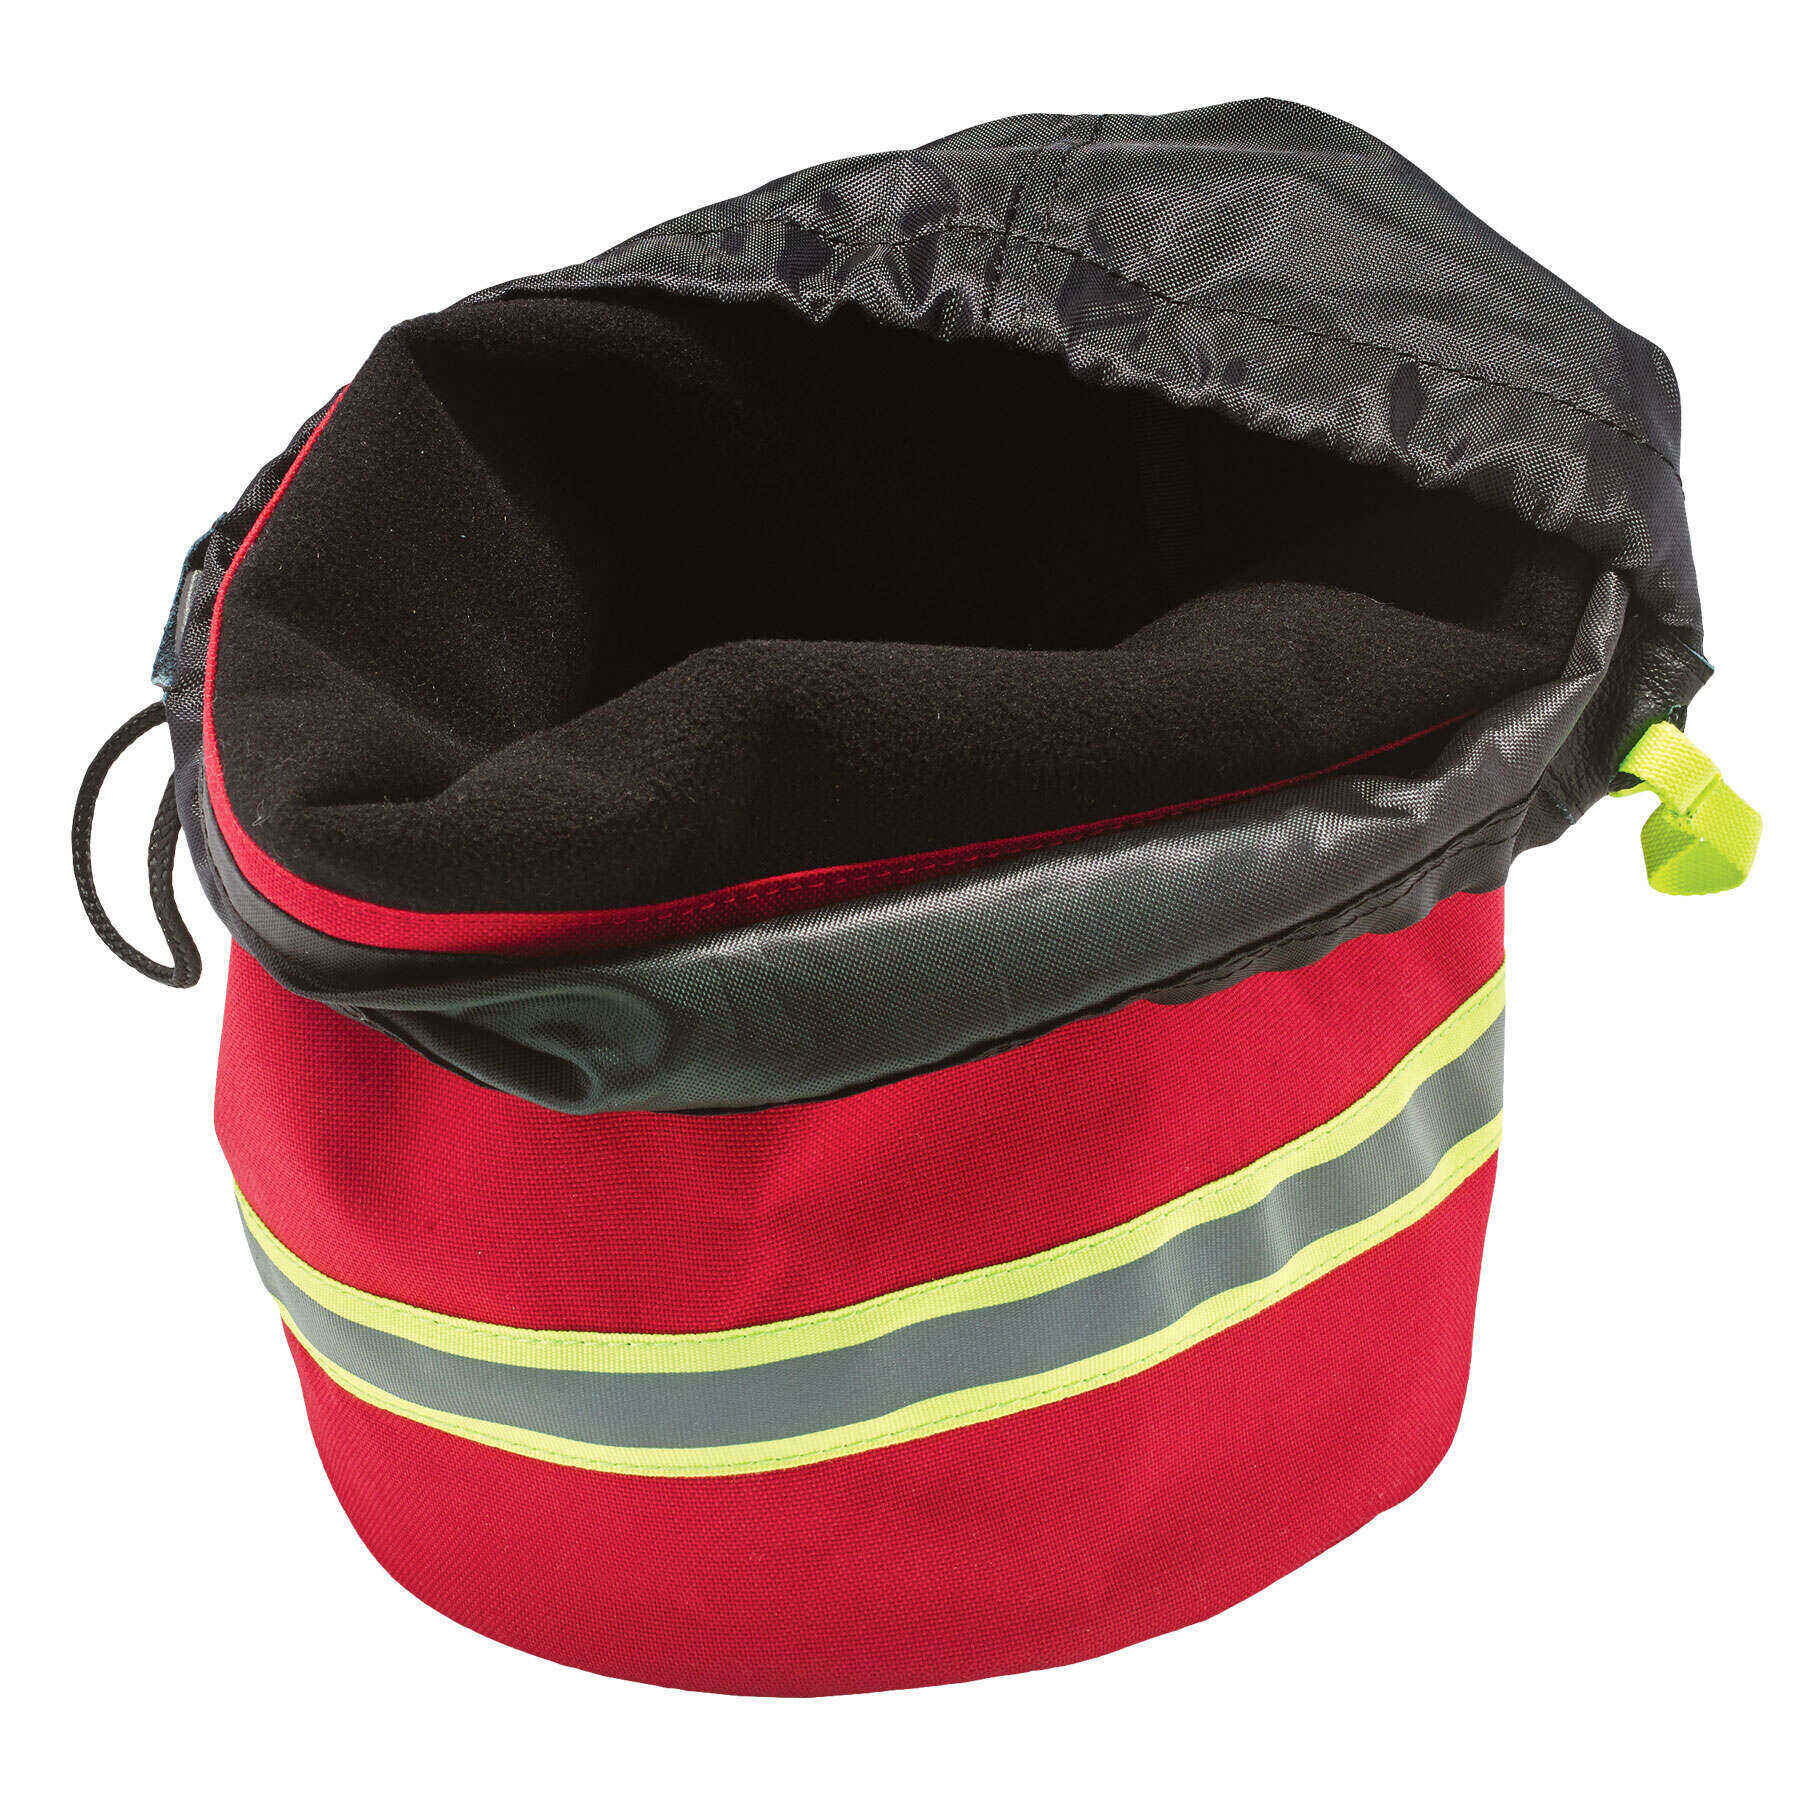 SCBA Mask Bag with Lining - Bags/Totes